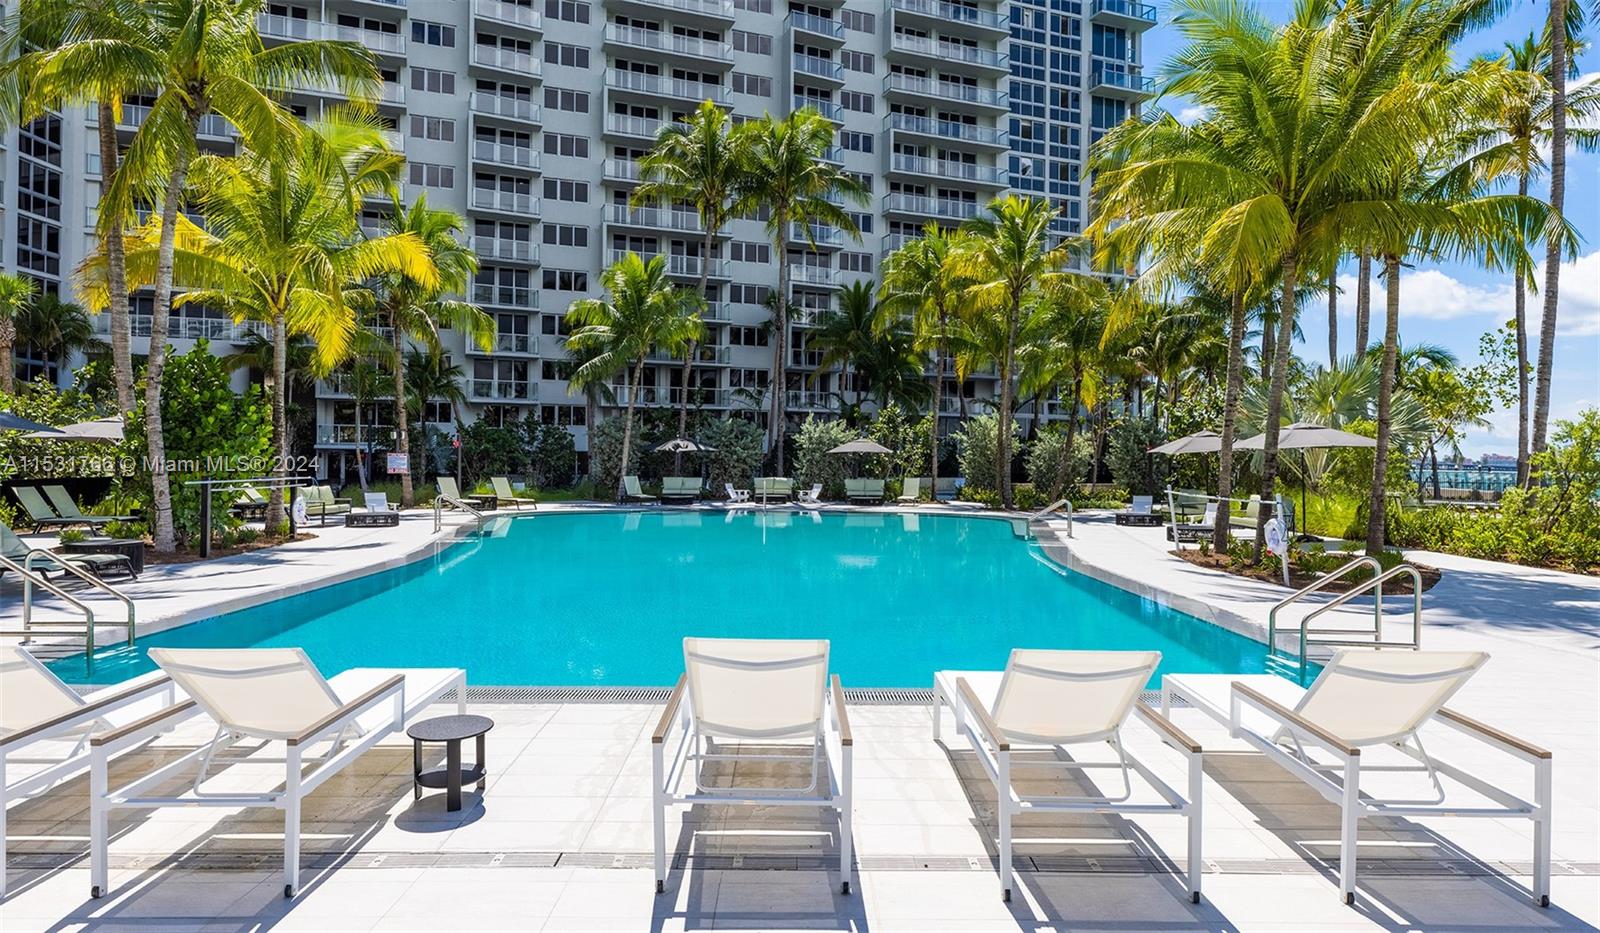 AVAILABLE 03/30 (UNIT CAN'T BE SHOWN TILL AVAILABLE DATE). Welcome to Miami Beach's residential community, Flamingo Point. This 1 bed/1 baths apartment features wood floors throughout, modern kitchen & baths w/SS appliances & granite counter tops. Amenities include a fitness center, resort style bay front pools surrounded by cabanas, l lounge chairs, a BBQ area. Move in costs are 1st month + $1500 deposit. Parking cost 1st vchl. $117 p/m. Pet Fee: $500+$50/month. *FAST APPROVAL! (NOTE: Rental rates are subject to change depending on move-in date and lease term. Advertised rate is best rate and maybe on leases longer than 12 months. Proof of income greater than 3x one month's rent is required and minimum credit score of 620 or higher in order to be approved).